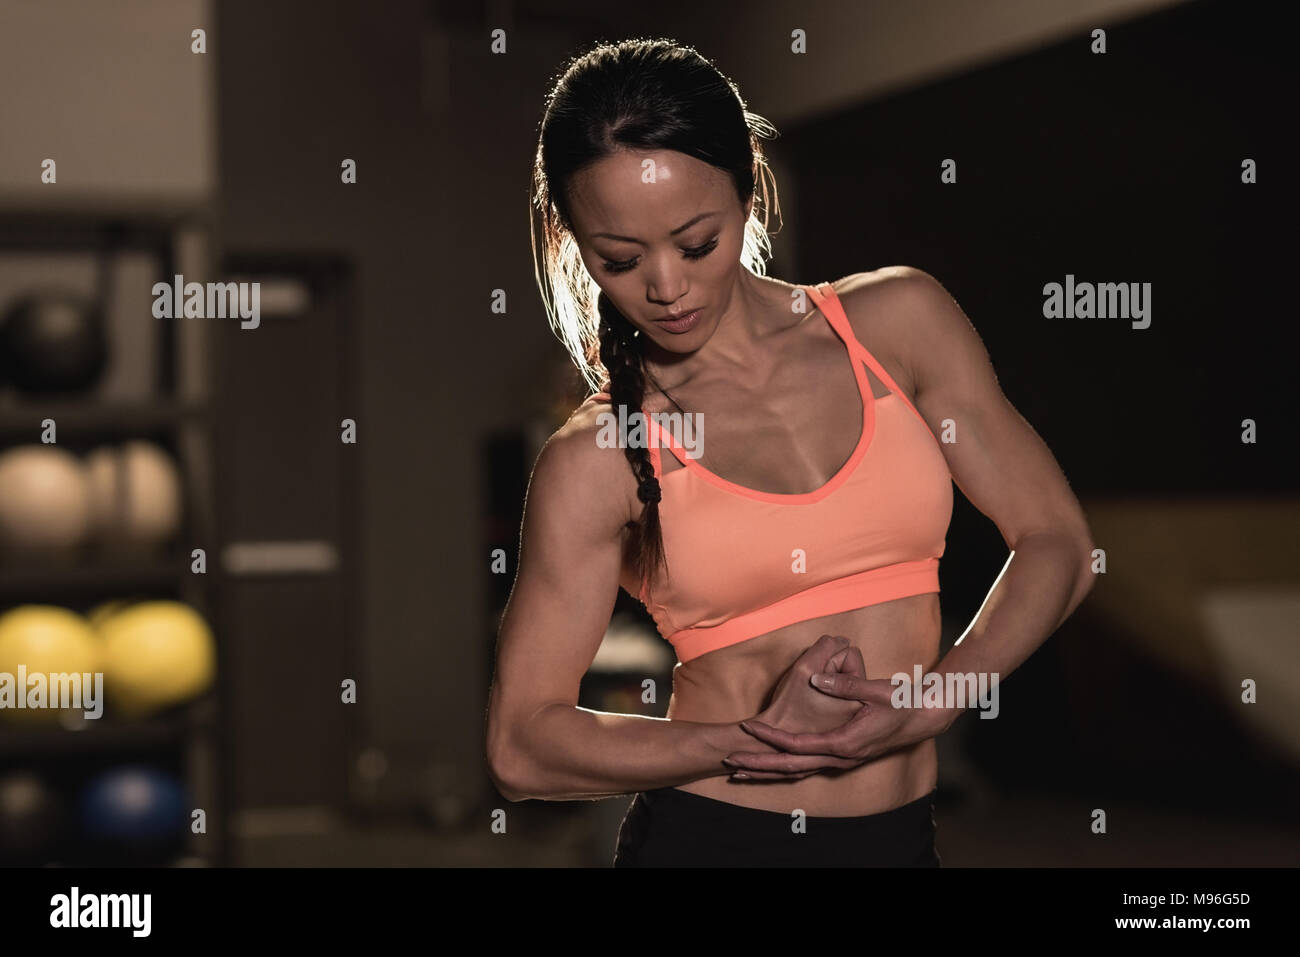 Fit woman flexing her muscles Stock Photo